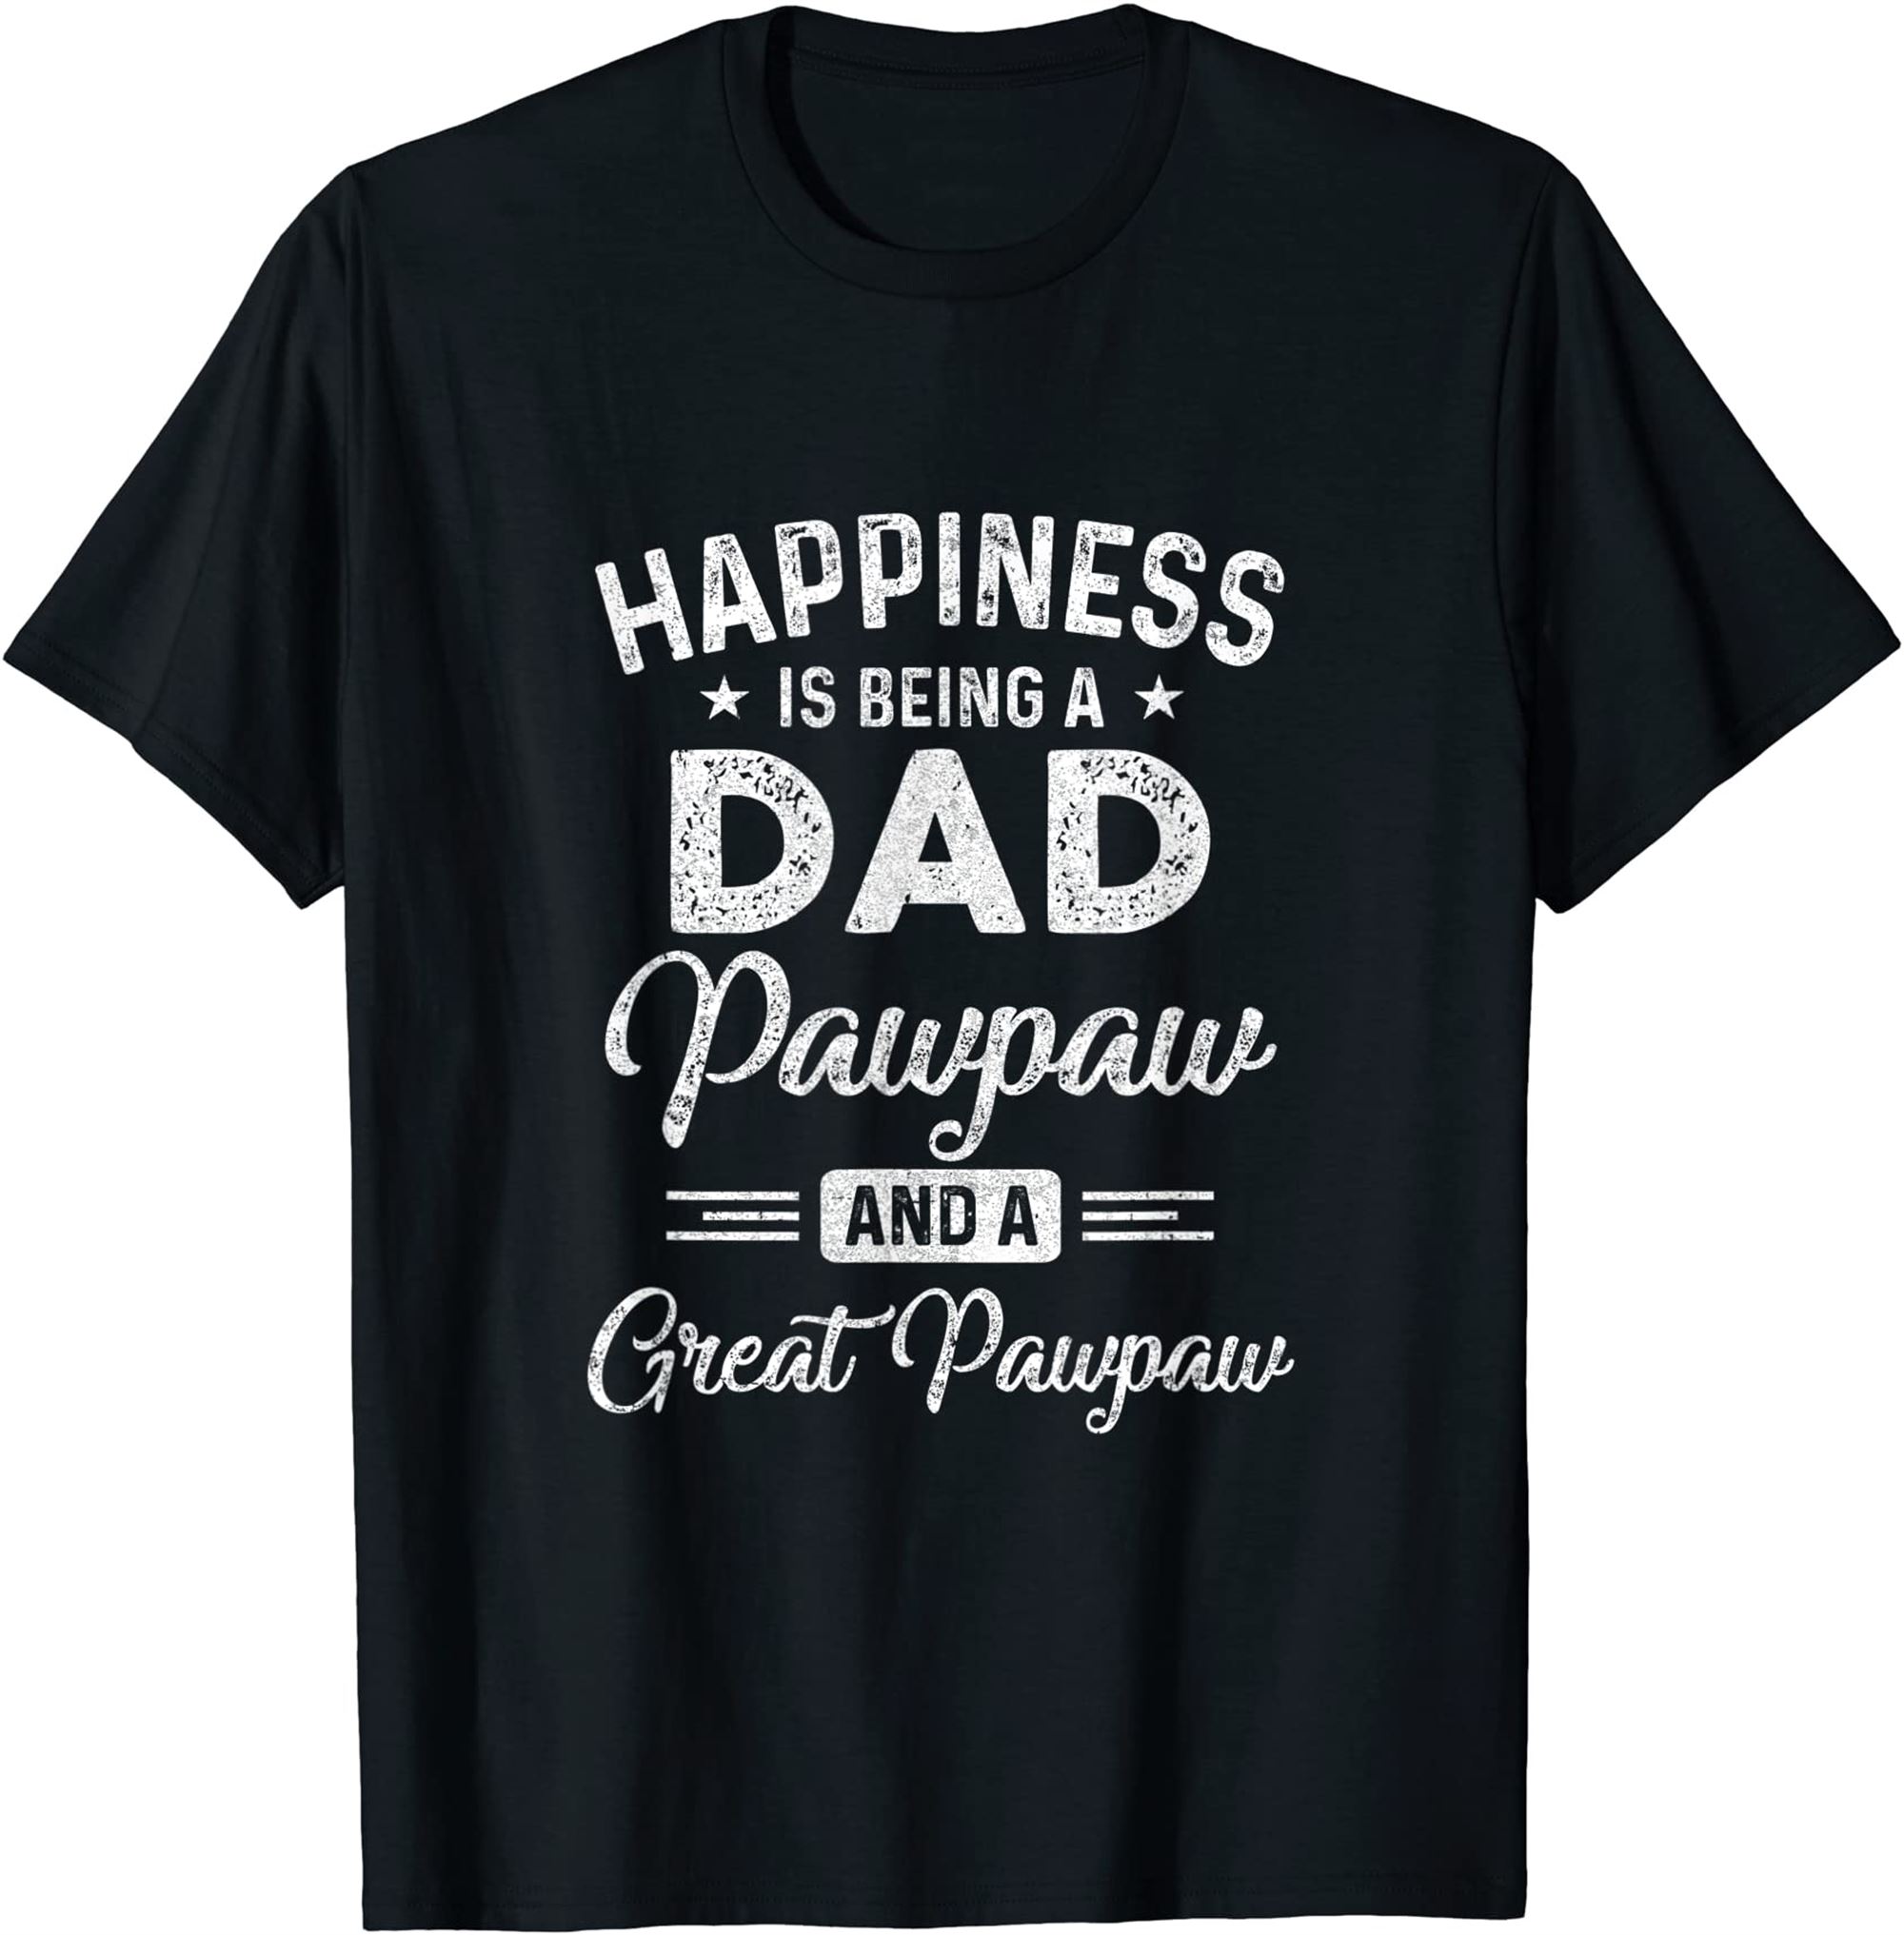 Happiness Is Being A Dad Pawpaw And Great Pawpaw T-shirt Plus Size Up To 5xl